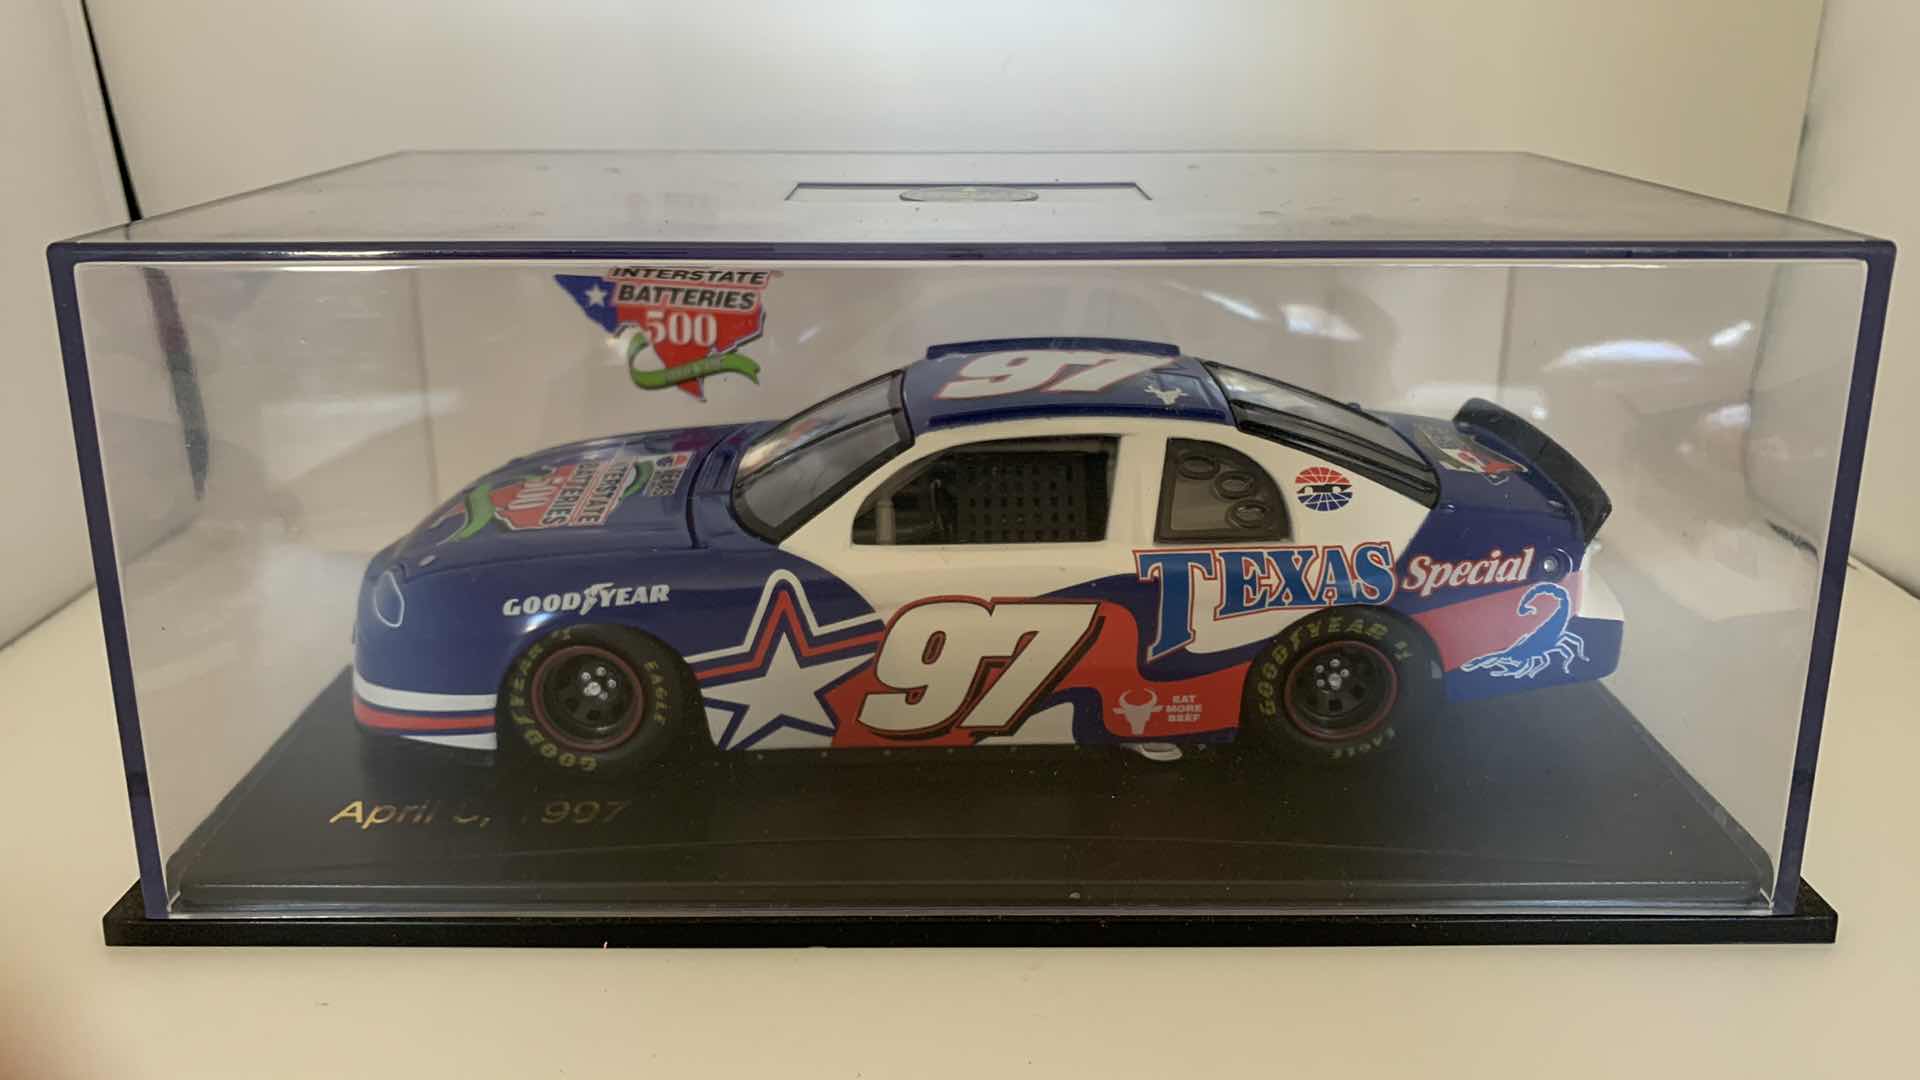 Photo 1 of SPORTS IMPRESSIONS APRIL 6, 1997 #97 TEXAS SPECIAL DIE CAST RACE CAR IN SHOW CASE.